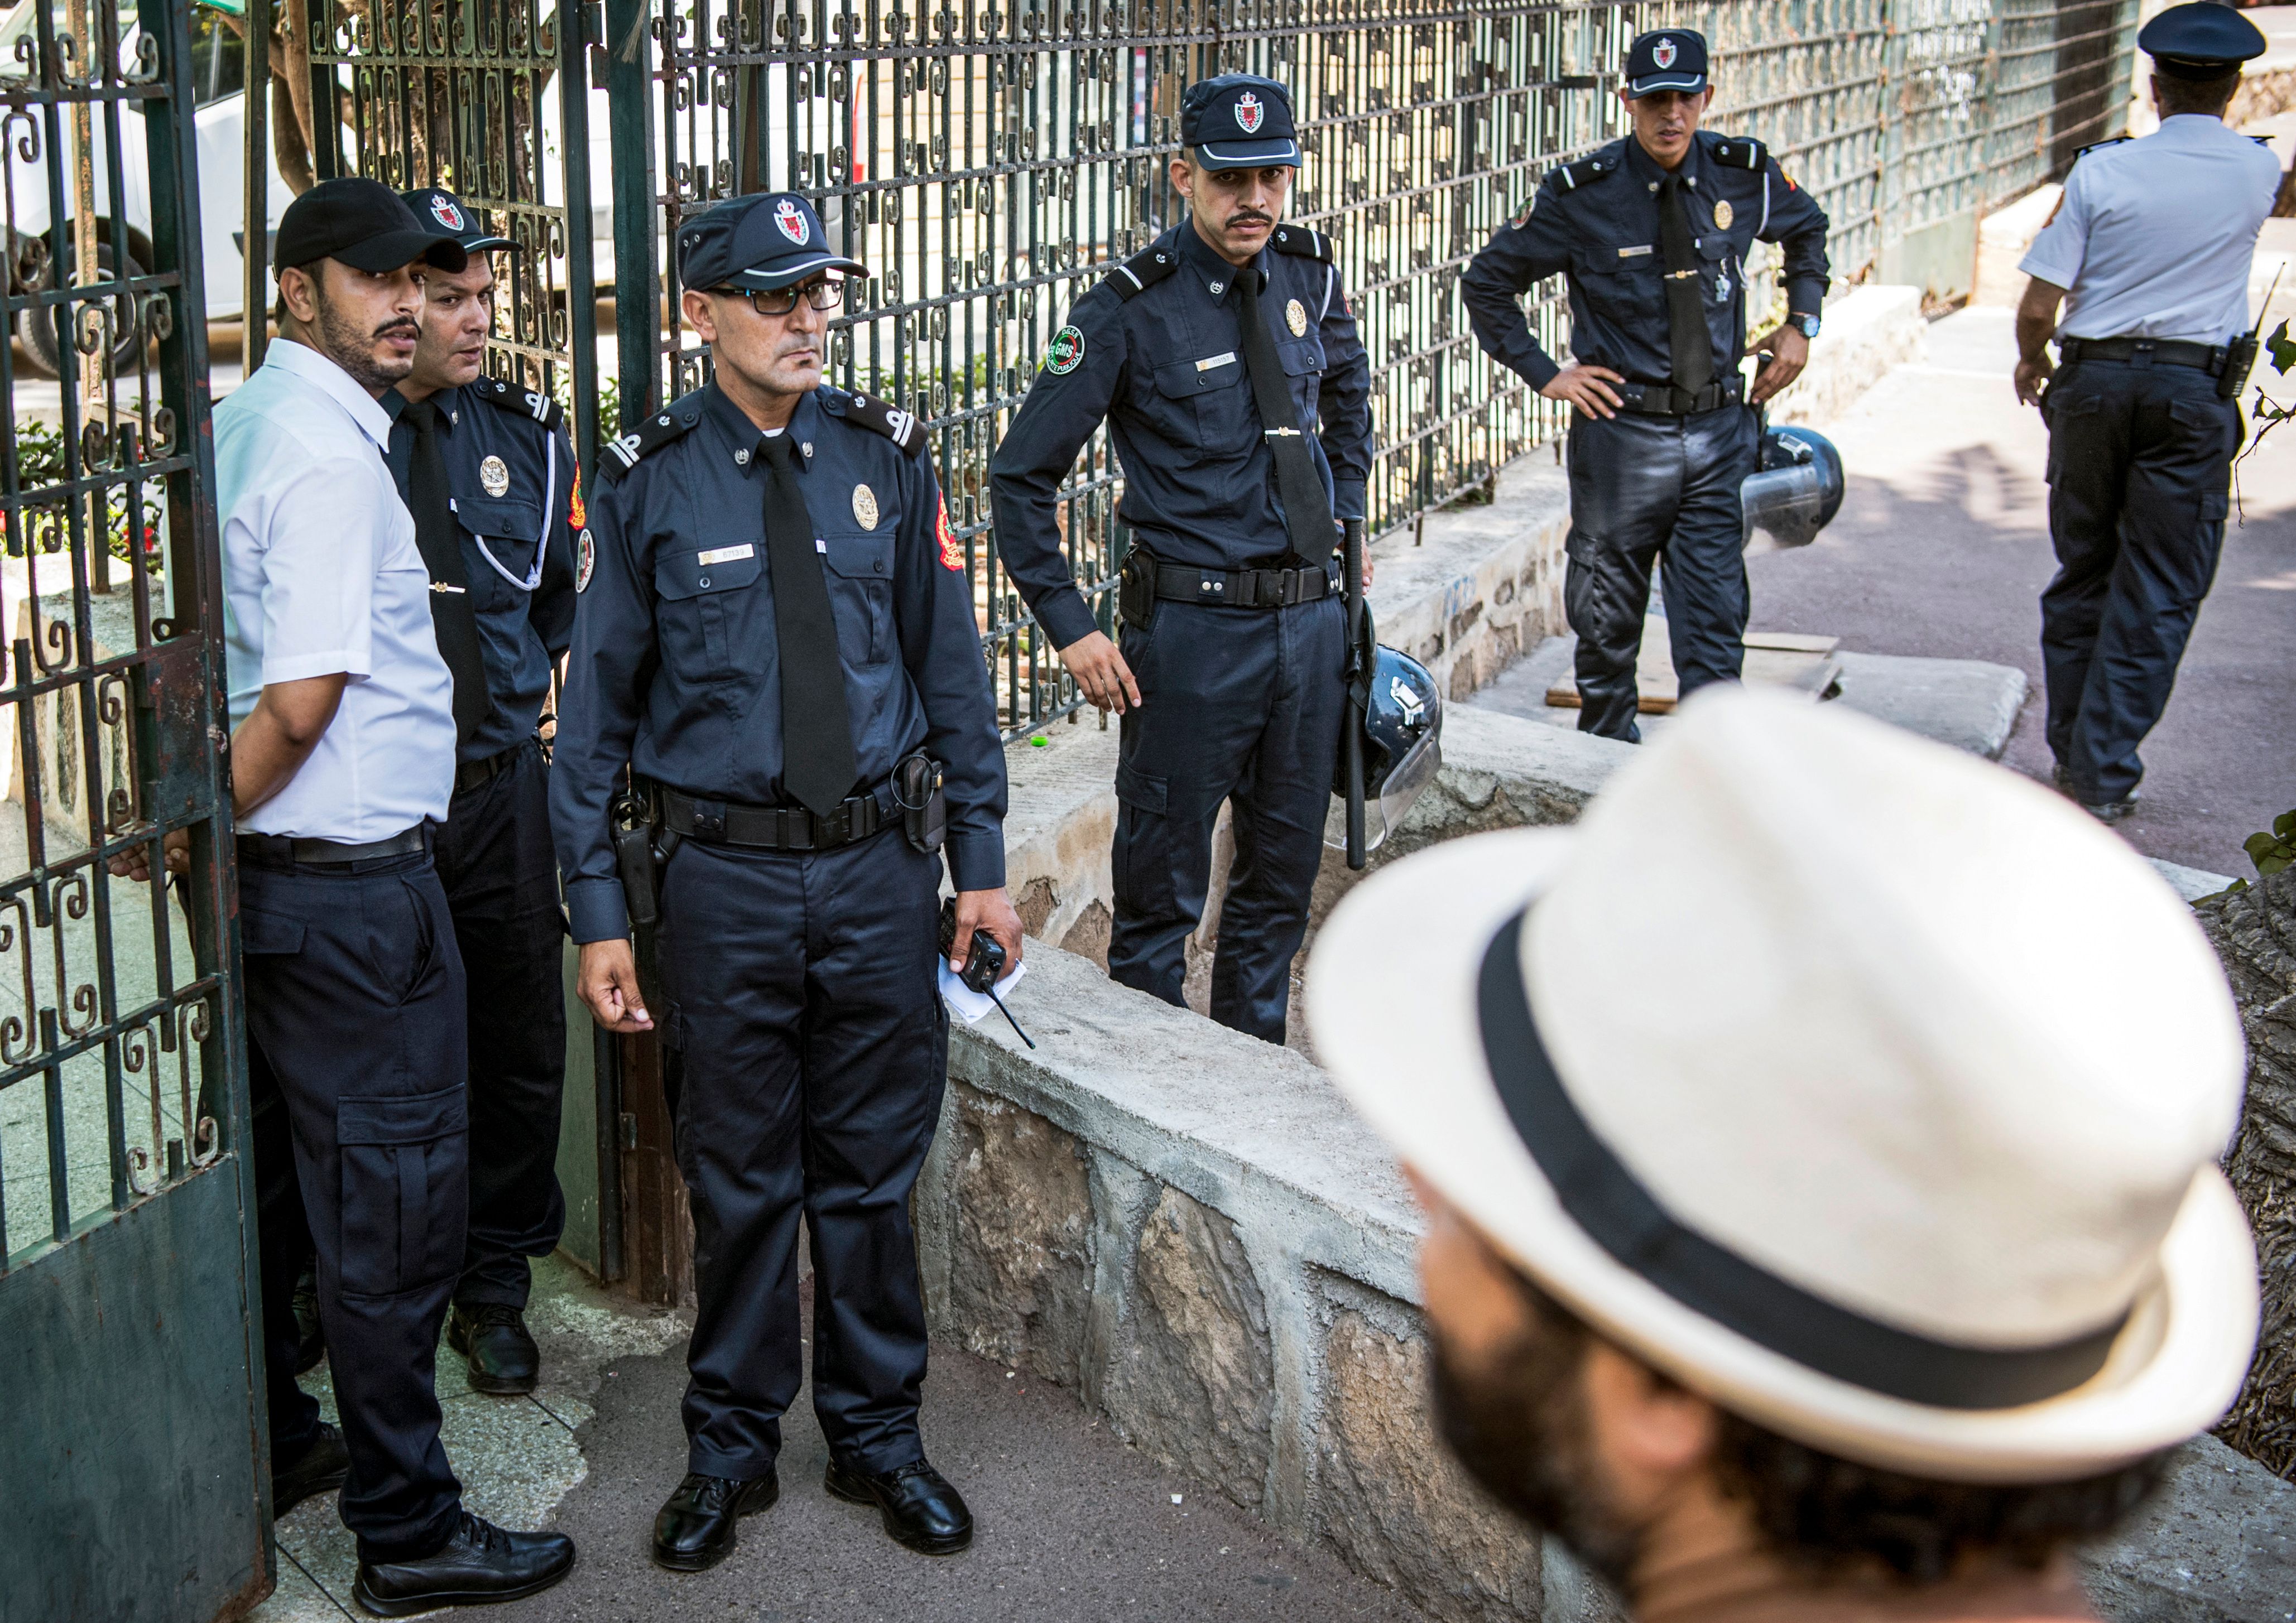 Moroccan security forces stand guard outside a courthouse holding the trial of Hajar Raissouni, a journalist of the daily newspaper Akhbar El-Youm, on charges of abortion, in the capital Rabat on September 9, 2019. (Photo by FADEL SENNA / AFP) 